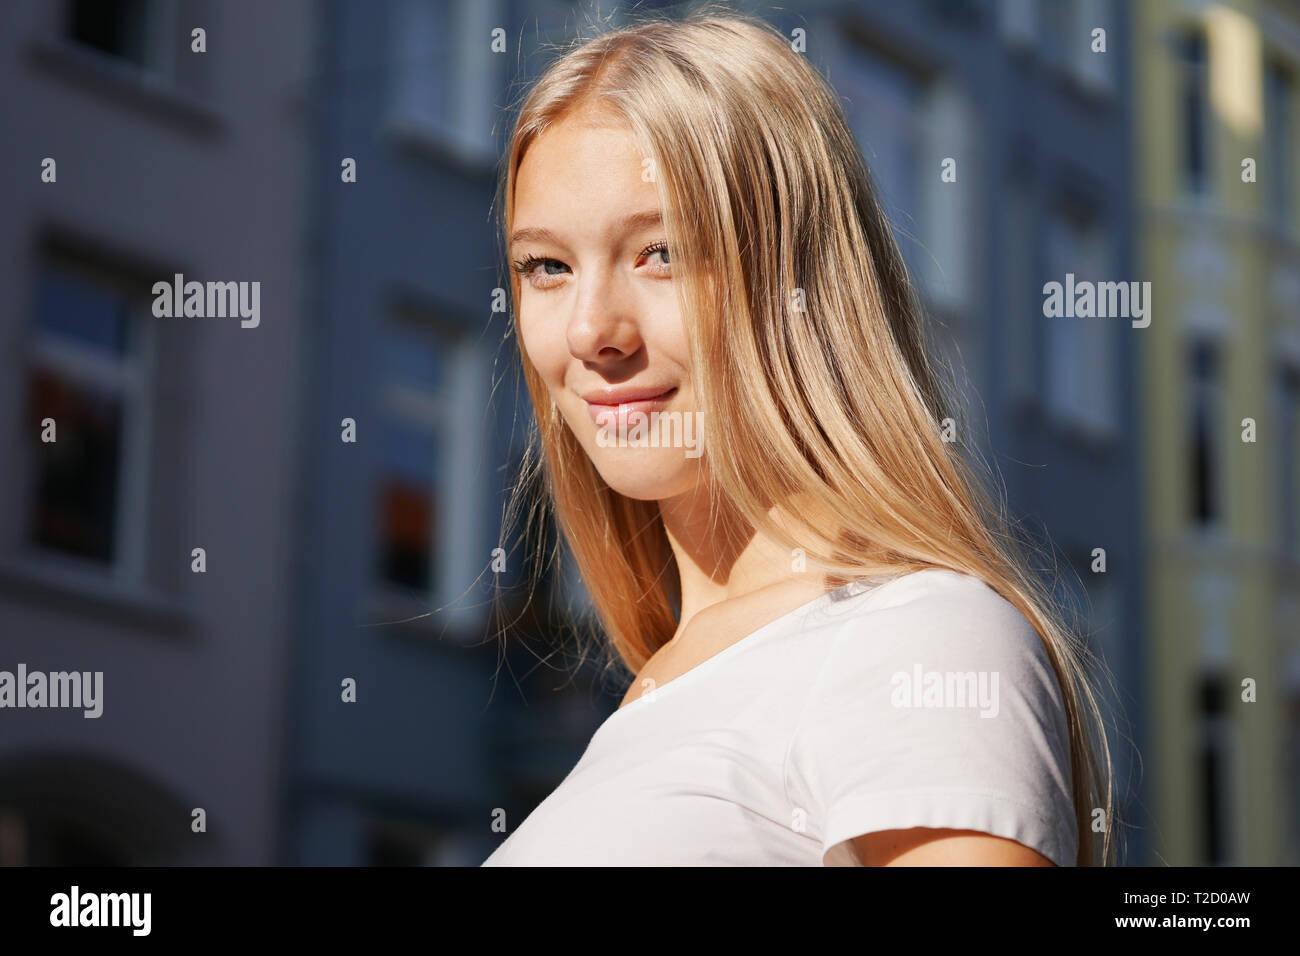 candid urban street style portrait of blond young woman Stock Photo